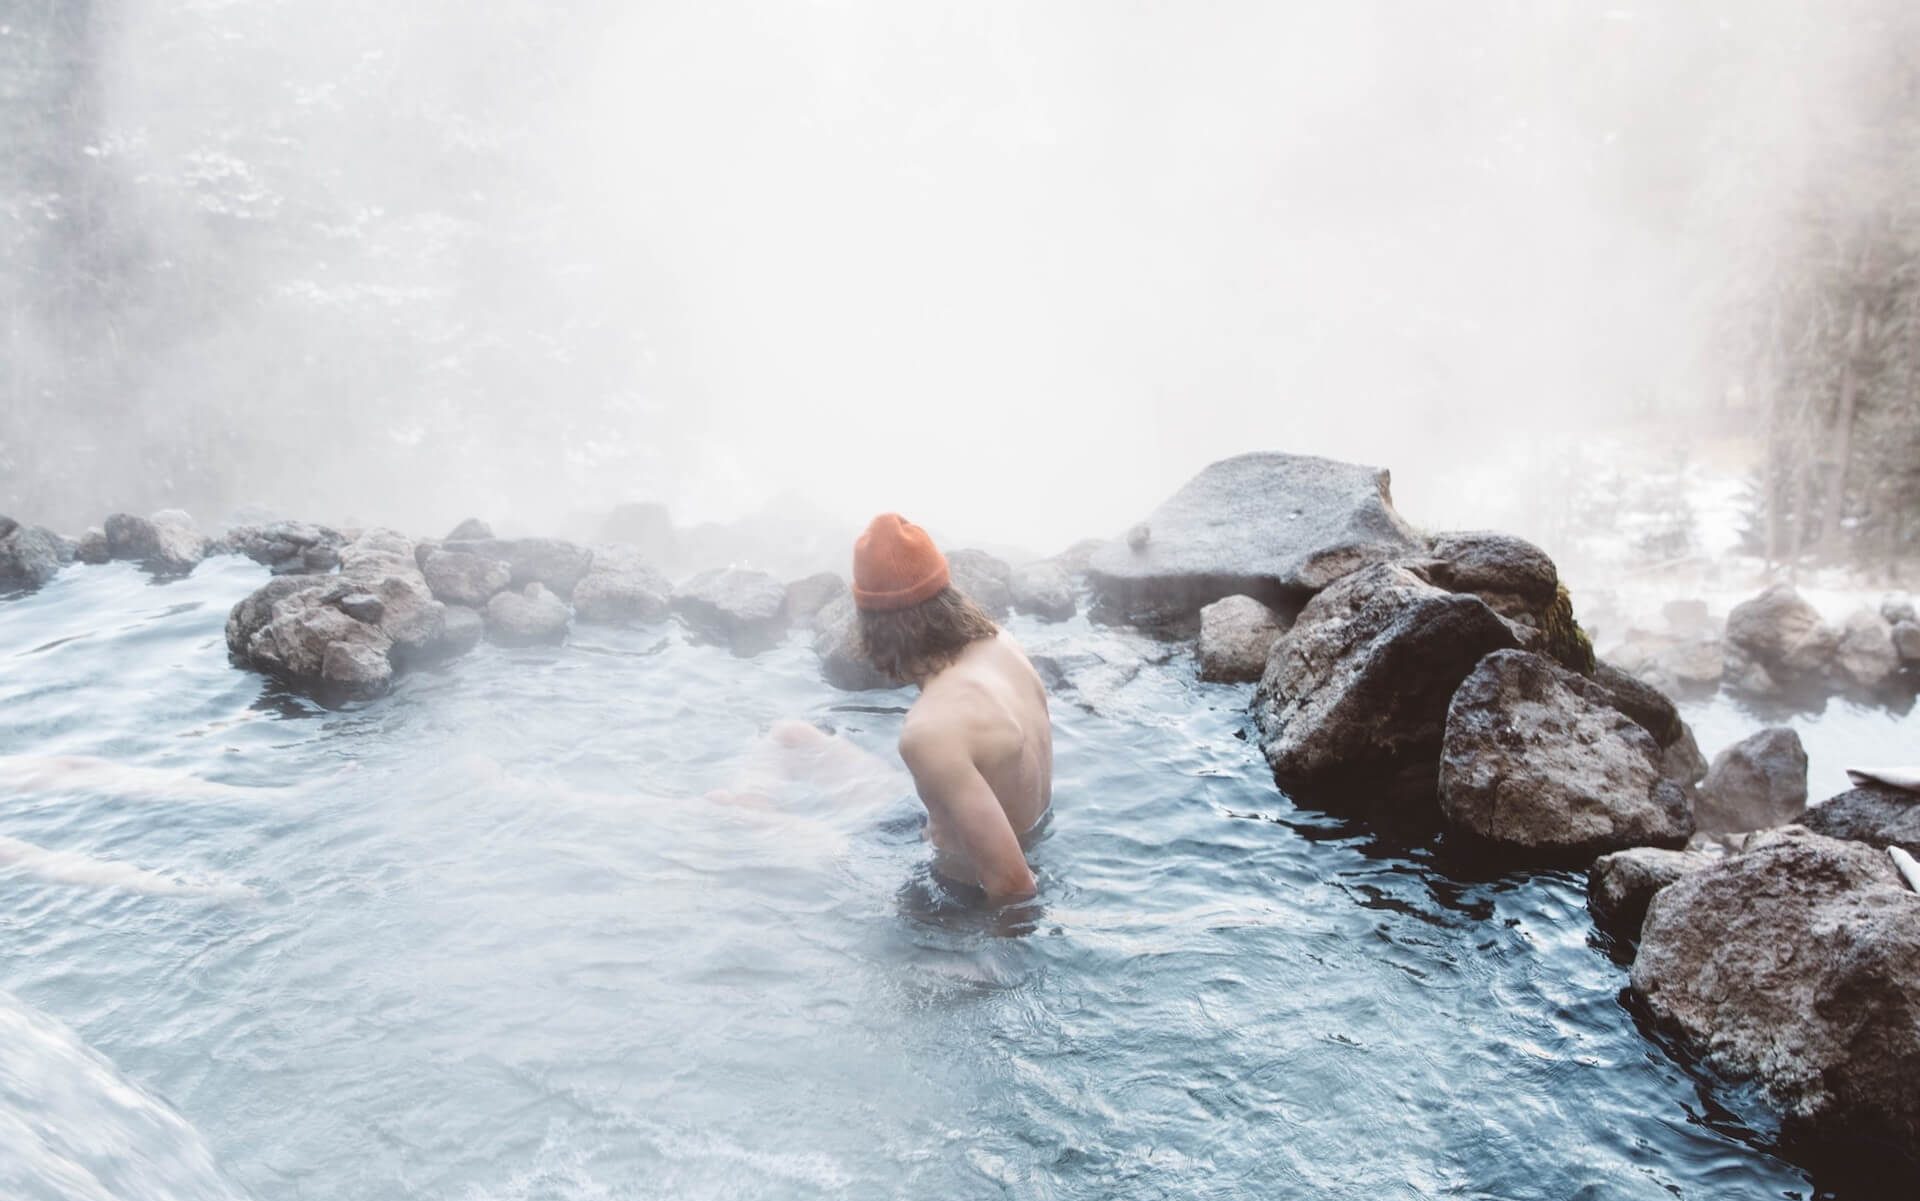 Person enjoying a hot spring in a snowy environment.